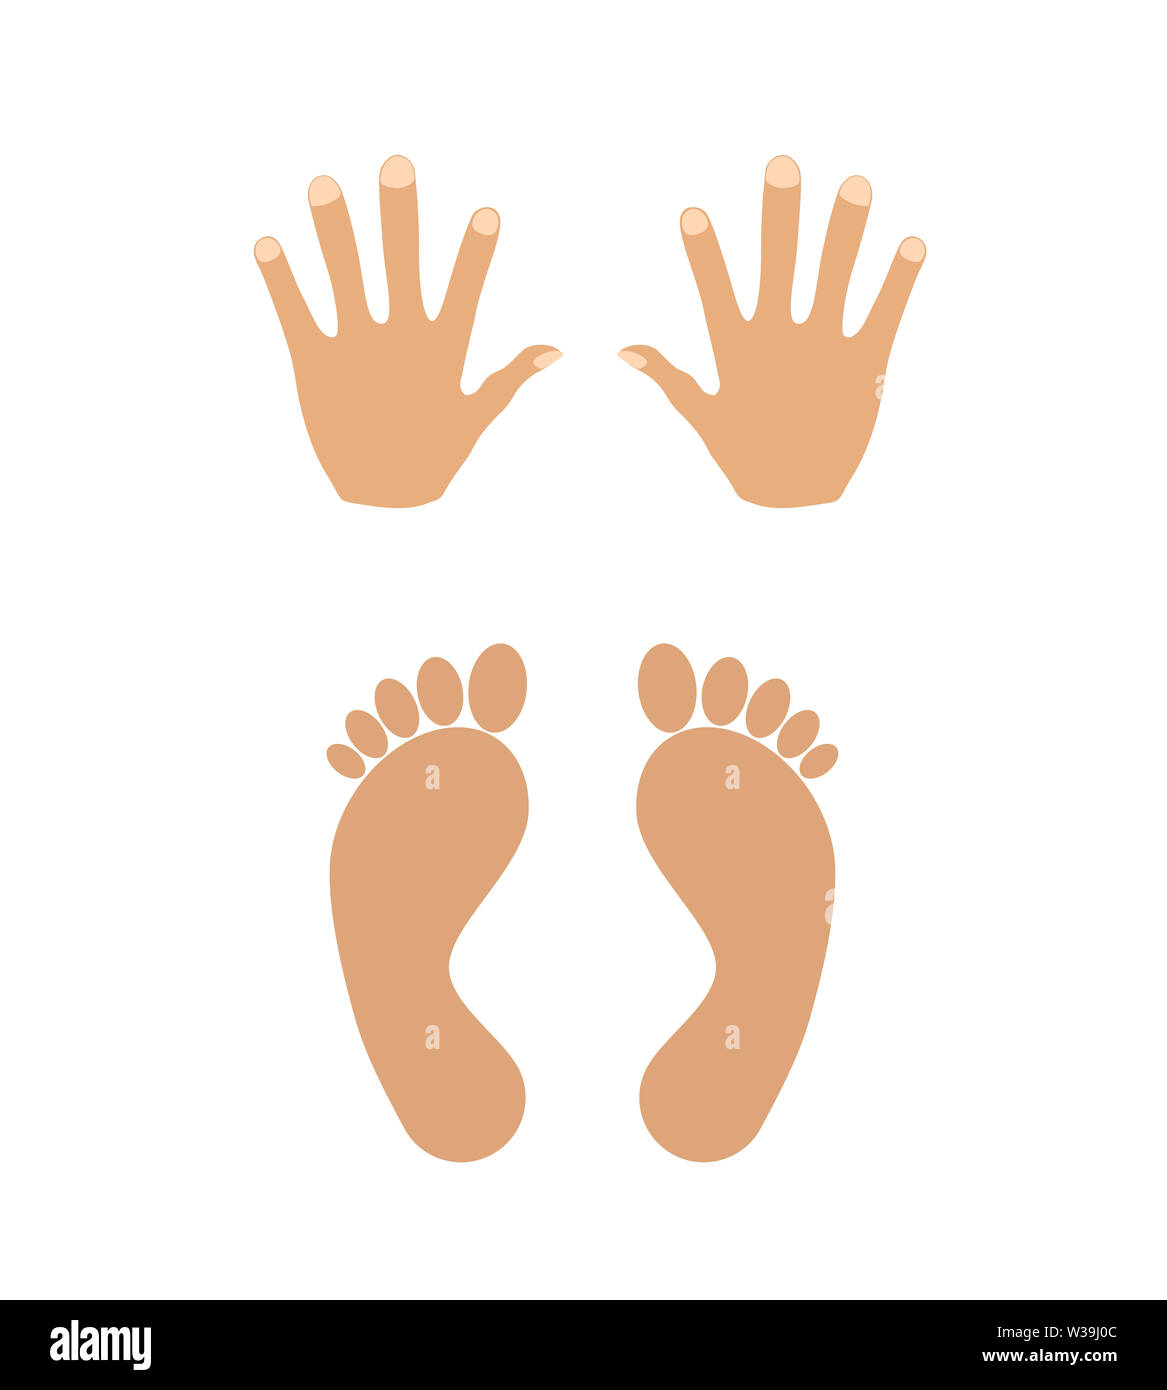 hands and feet vector illustration isolated on the white background Stock Photo